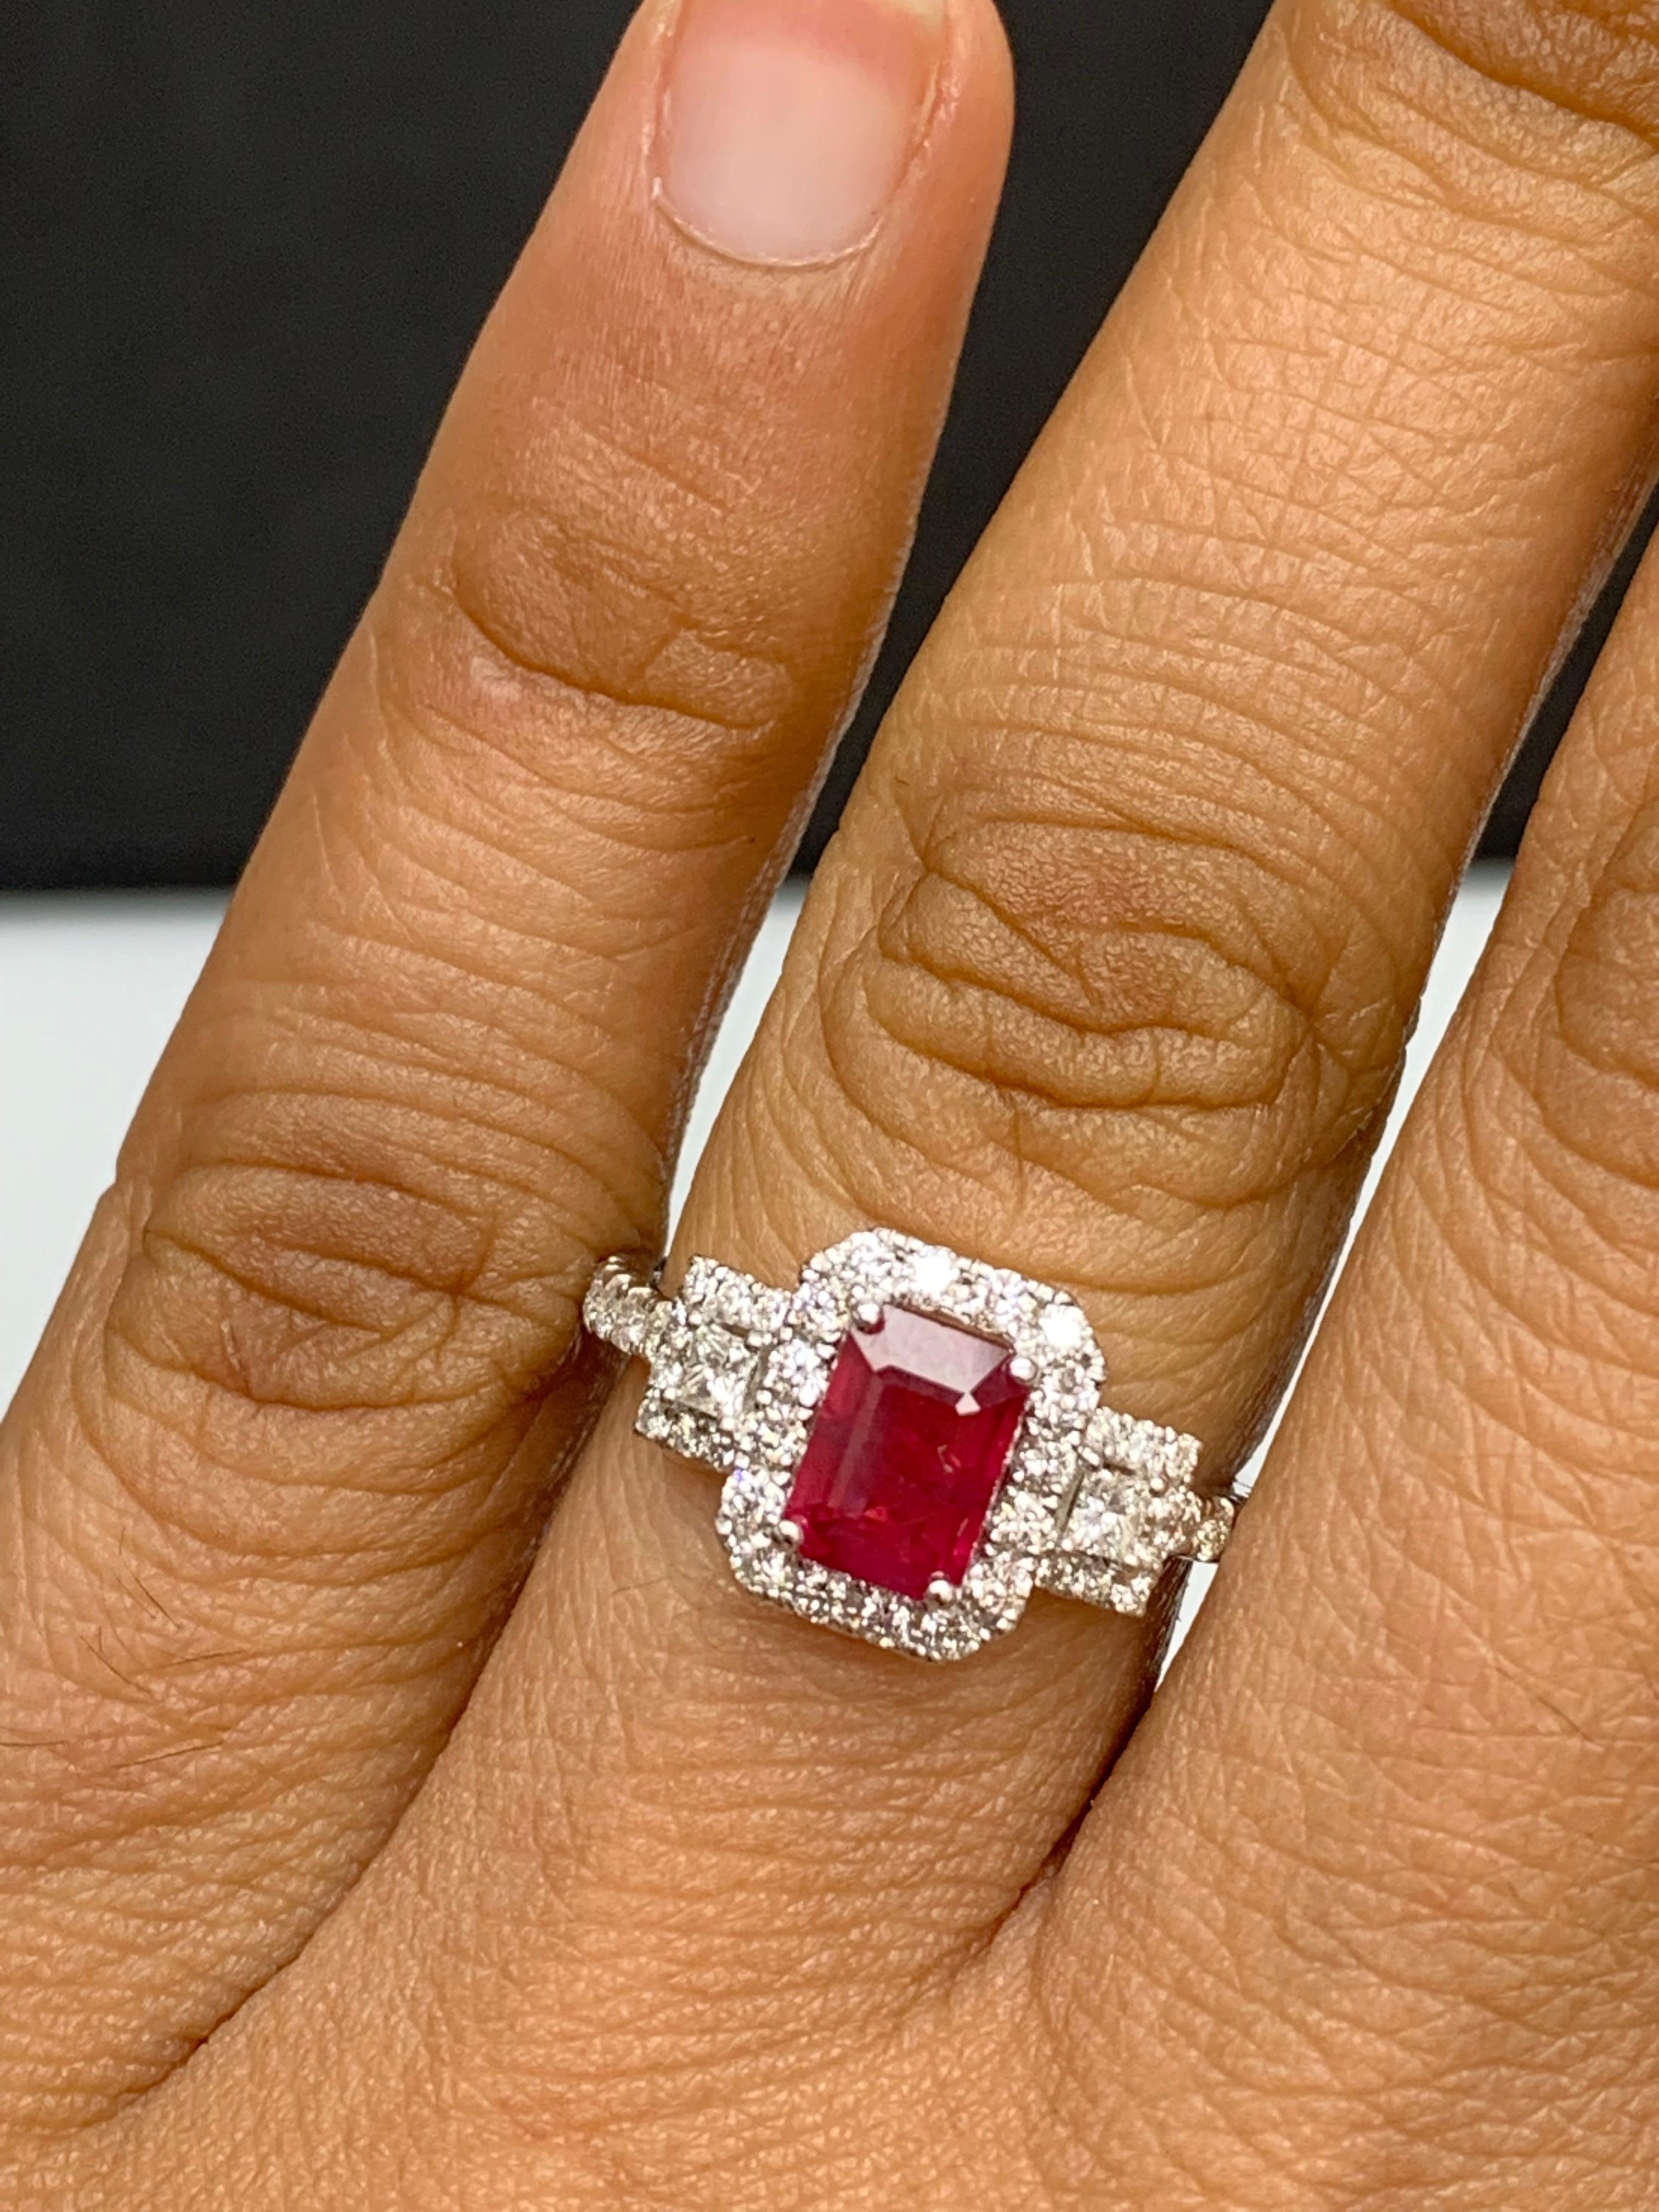 A stunning ring showcasing a rich red emerald cut Ruby weighing 1.43 carats surrounded by diamonds. The center stone is surrounded by a row of 42 diamonds, weighing 0.57 carats total, with 2 princesses cut diamonds on each side. Made in 18K White